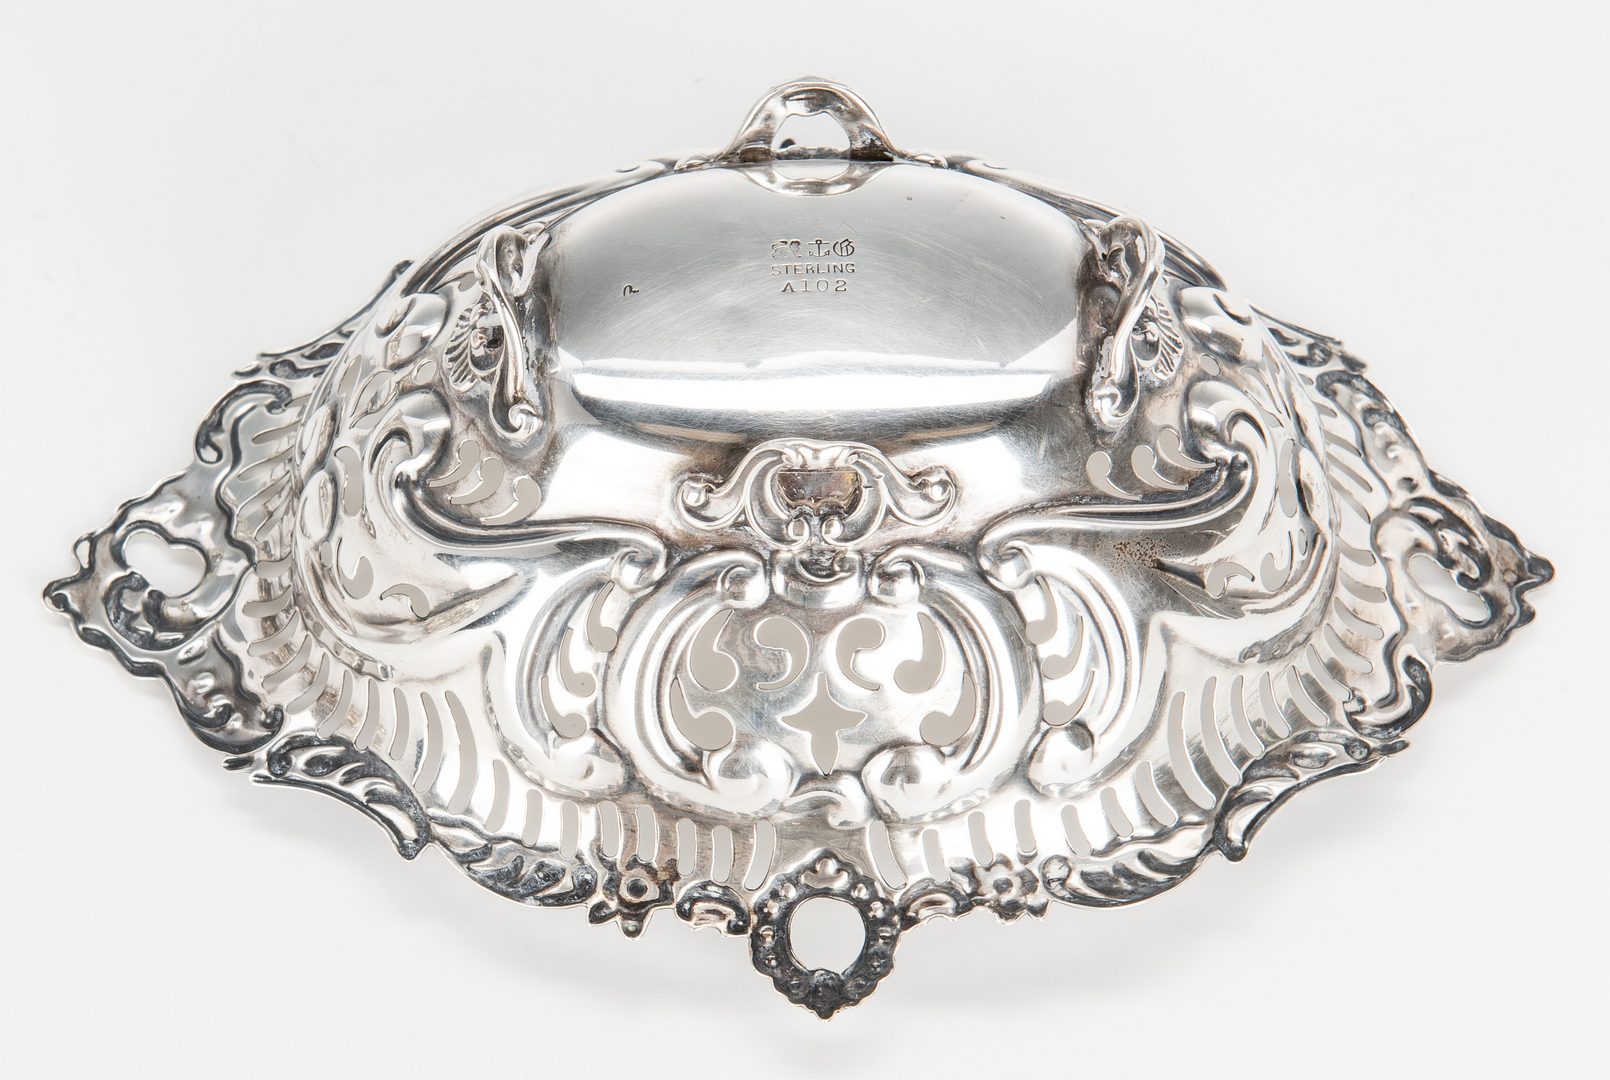 Lot 420: Pairpoint Silver Plateau & Gorham Sterling Nut Dish, 2 items